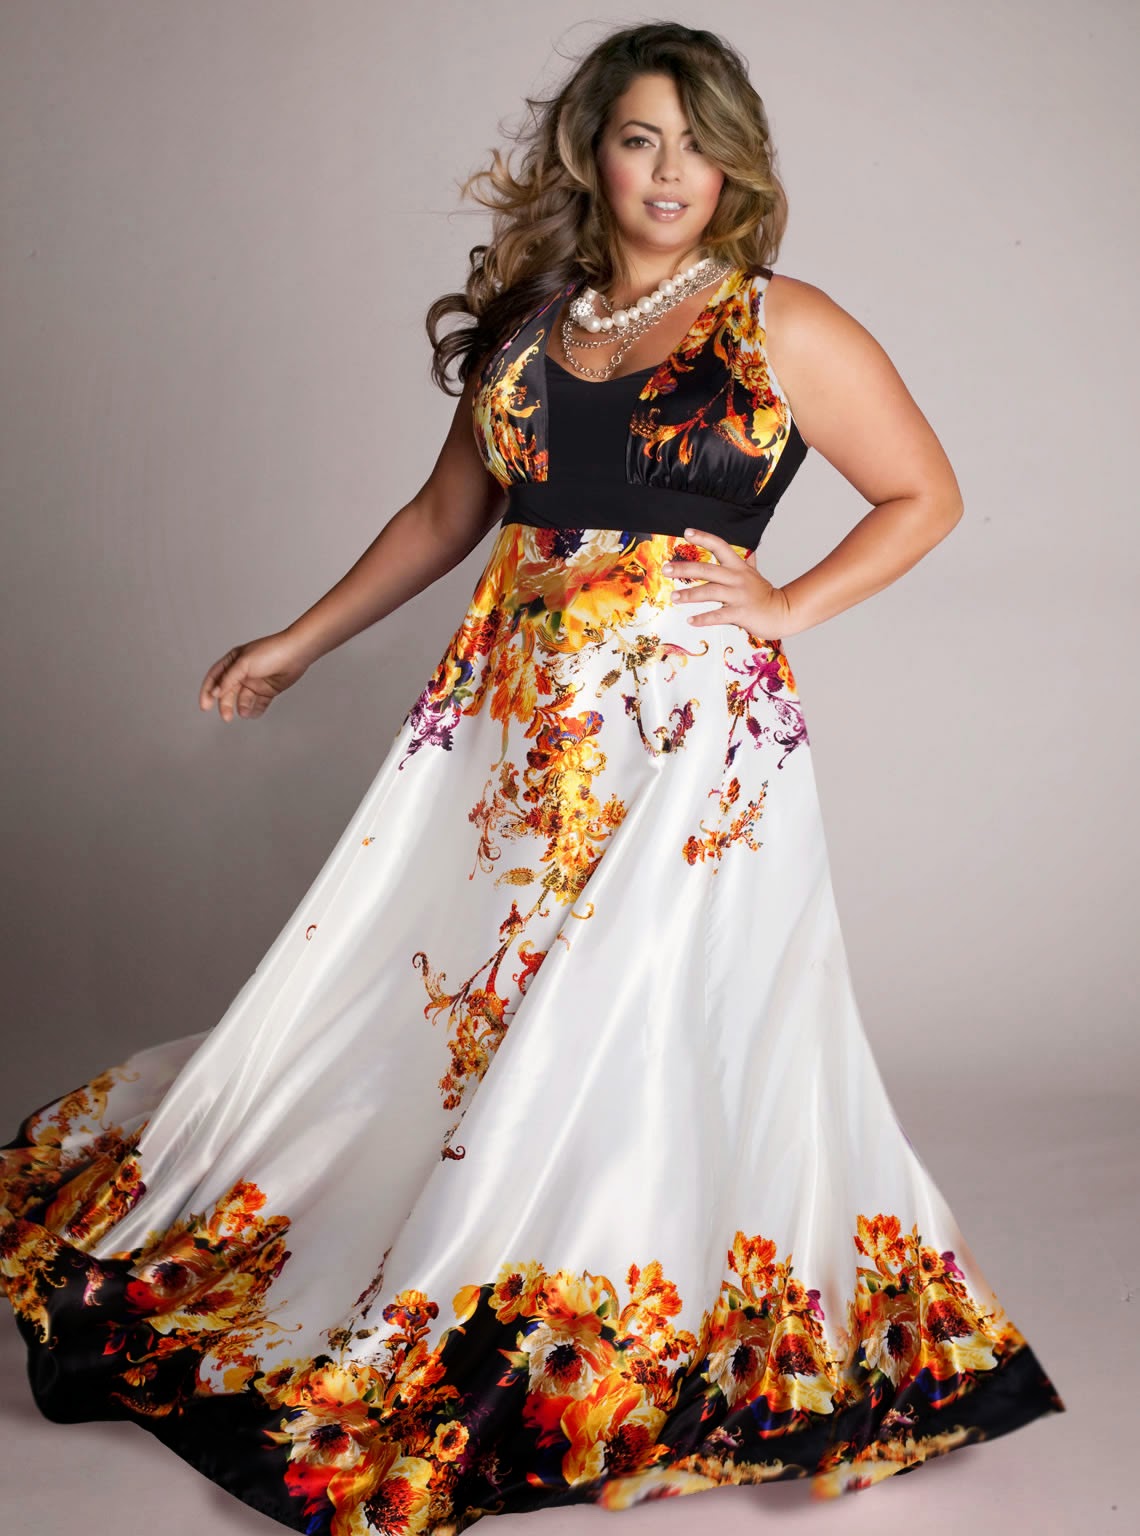 All About Women's Things: Look Fabulous in Plus Size Bohemian Clothing